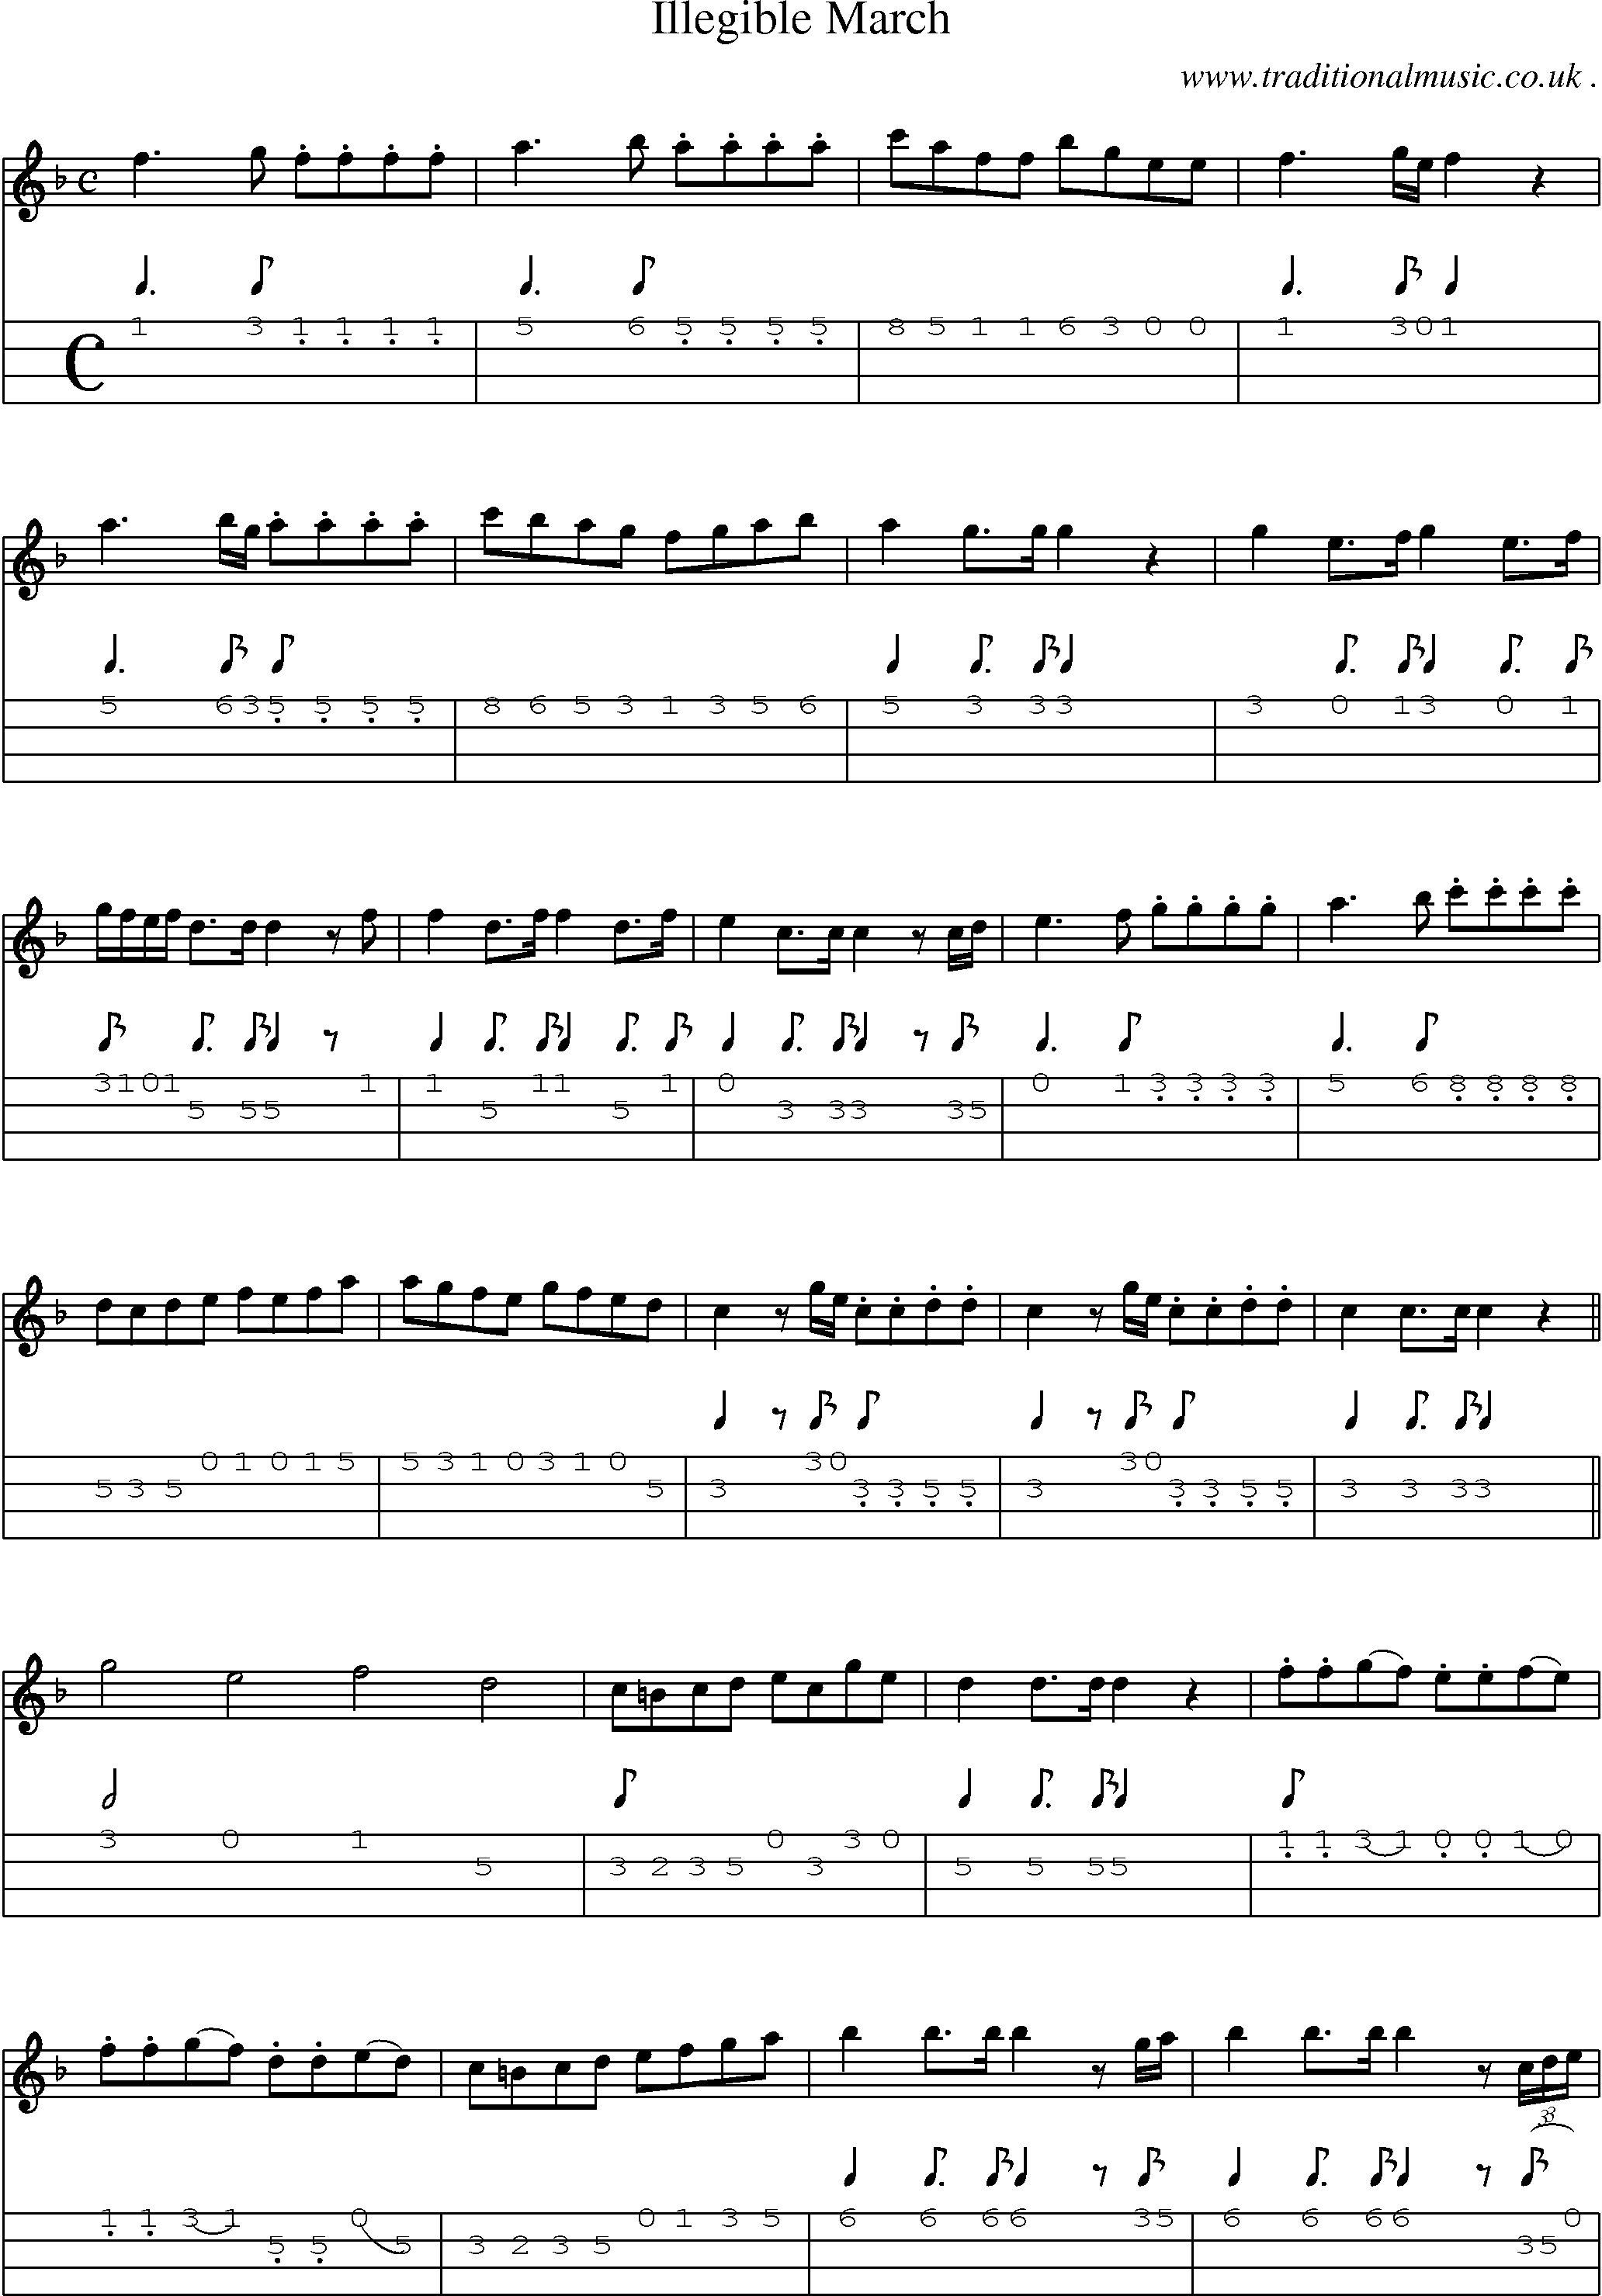 Sheet-Music and Mandolin Tabs for Illegible March